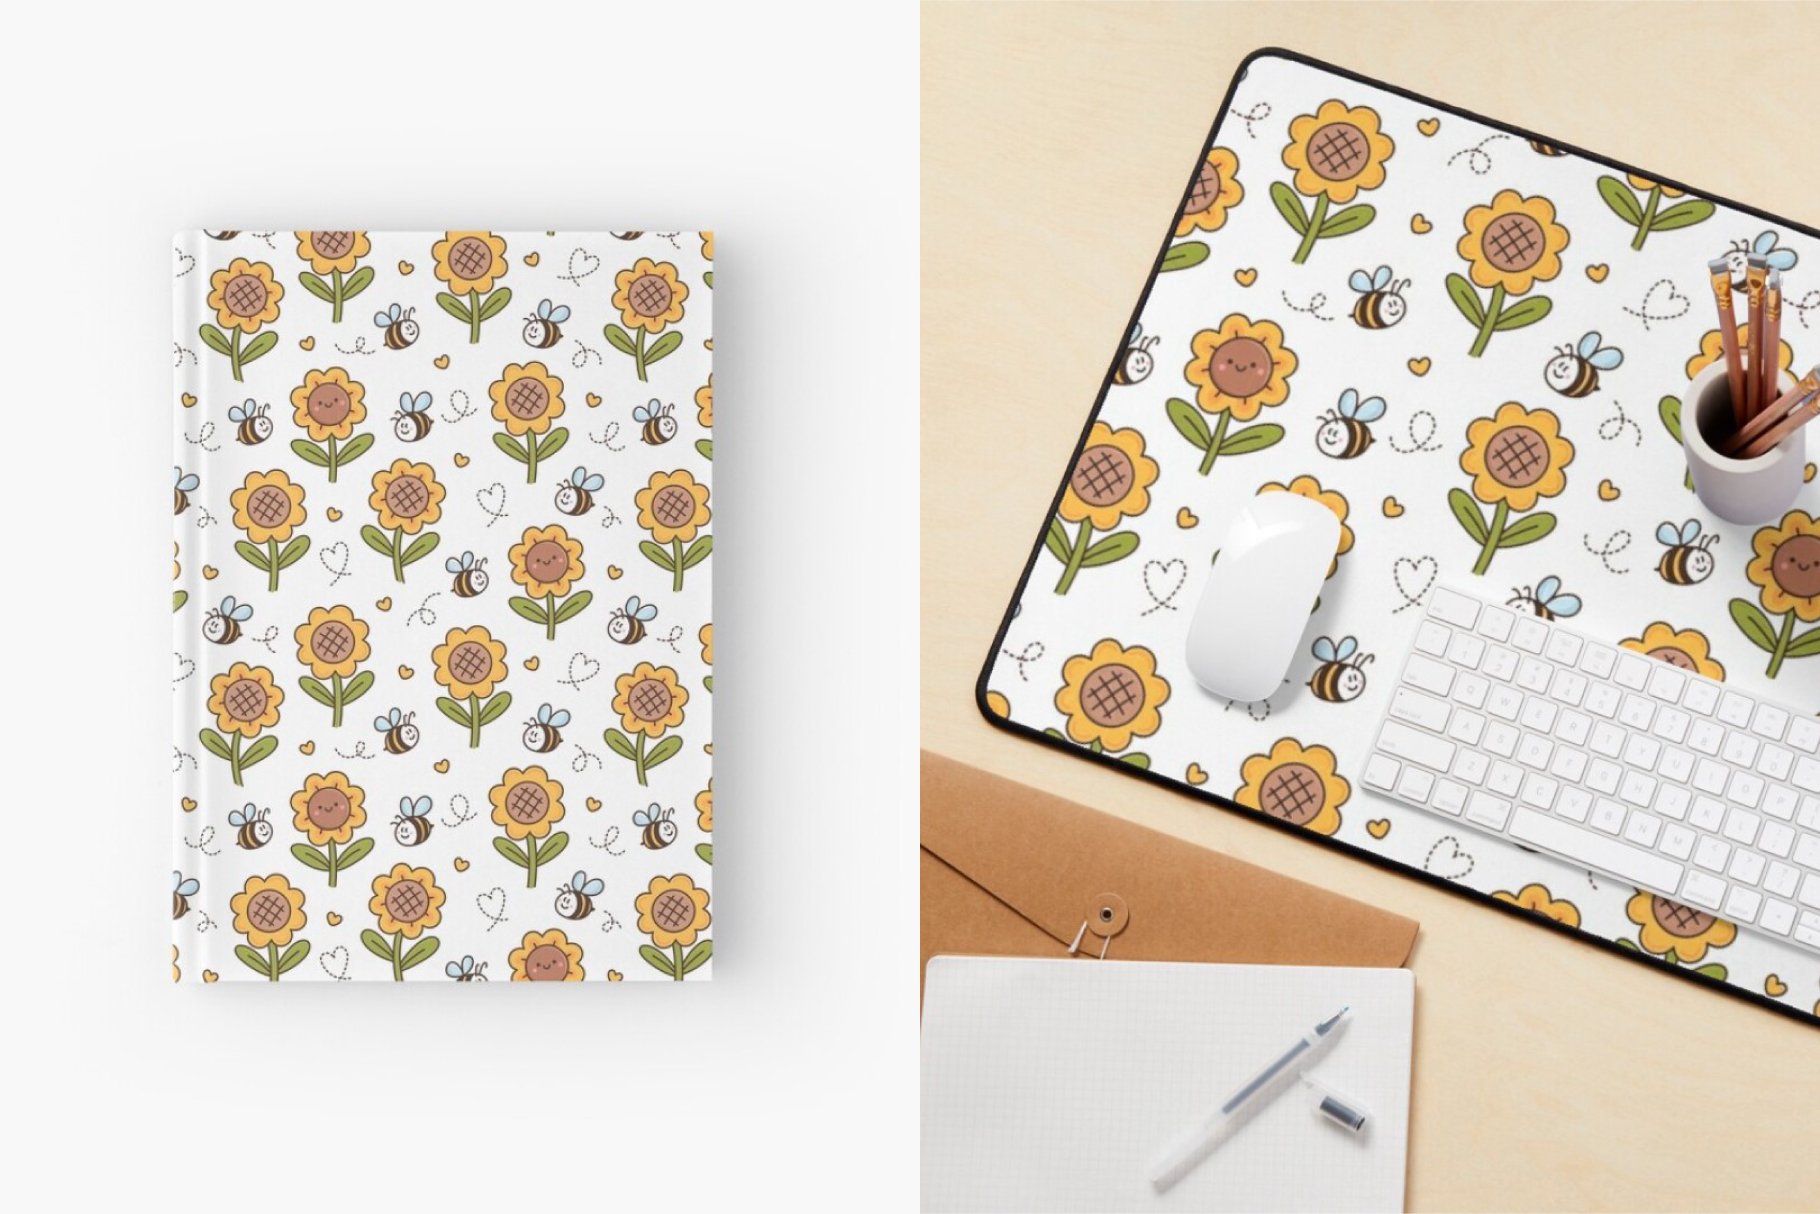 Honey bee patterns preview image.